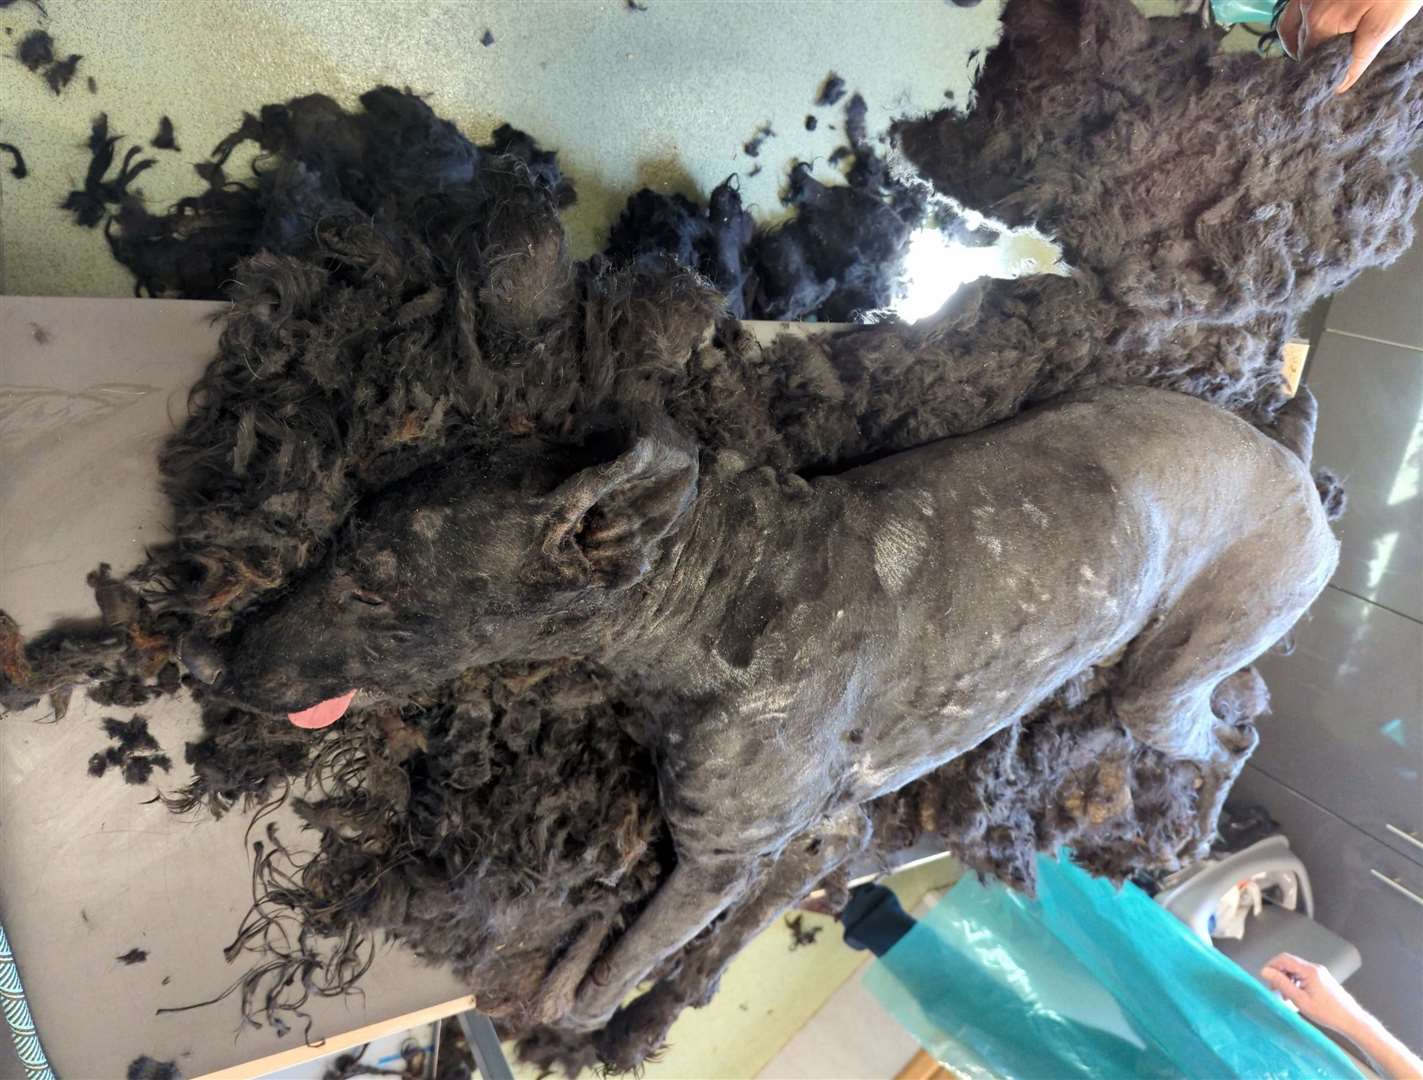 Almost 8kg of hair was shaved off Barney. Picture: RSPCA